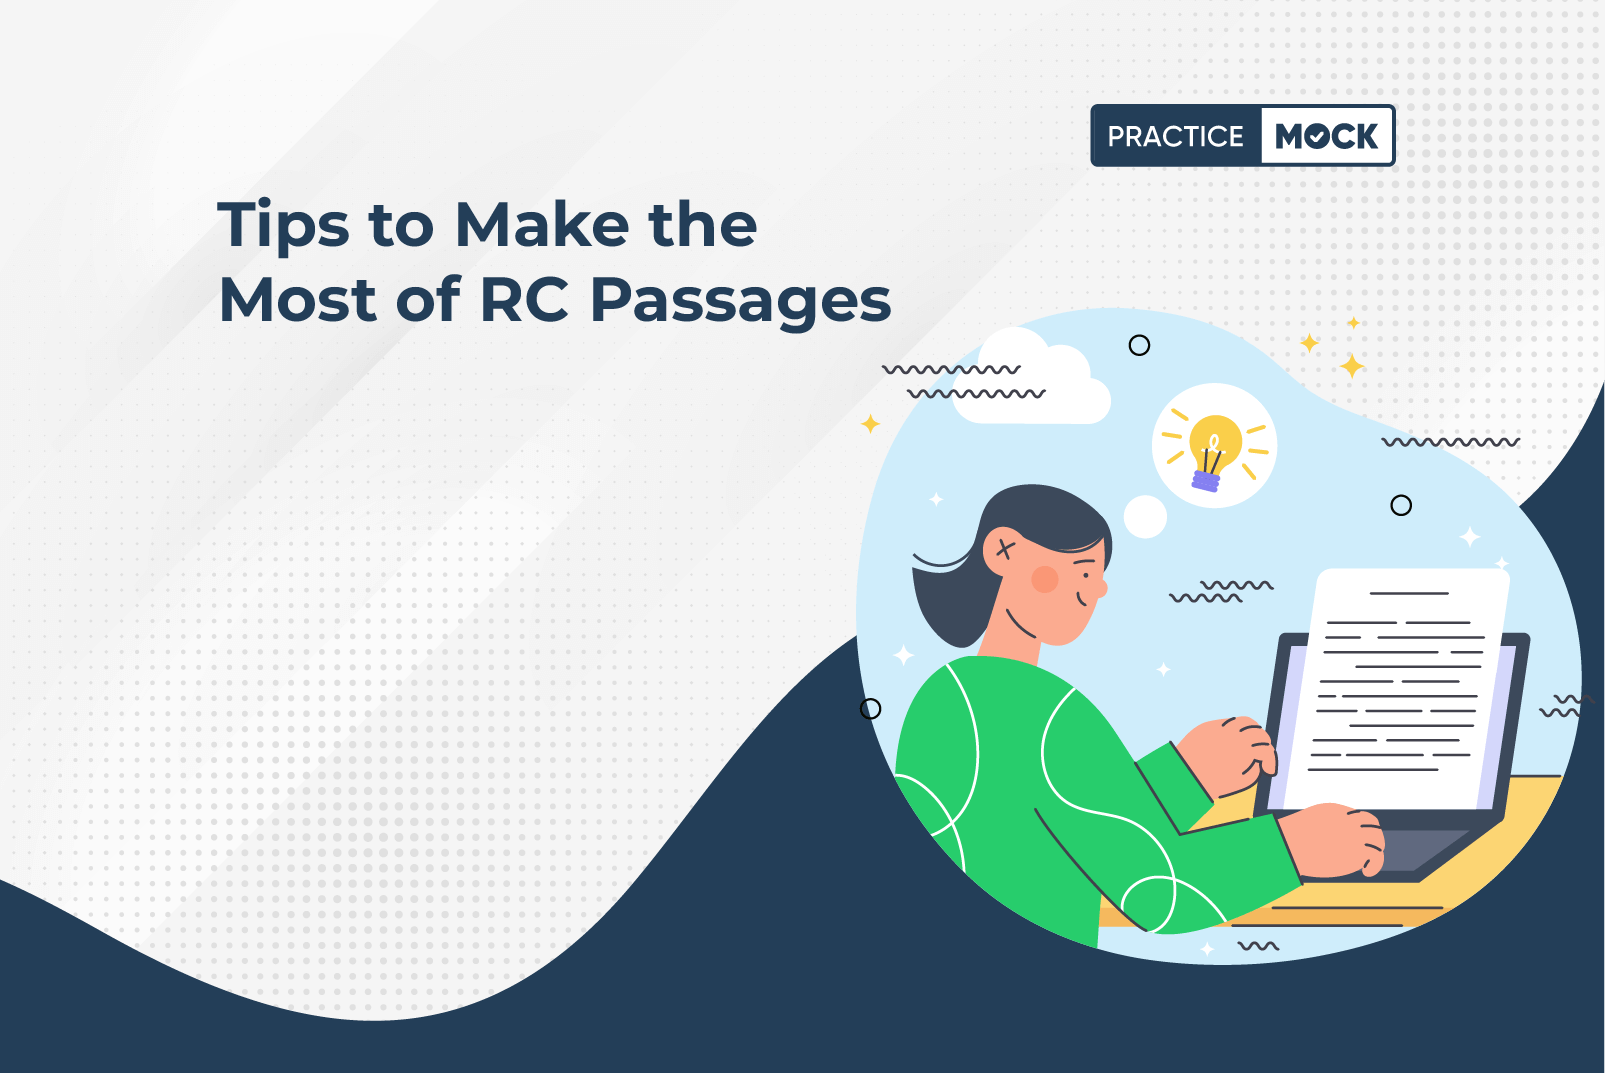 Tips to Make the Most of RC Passages (1)